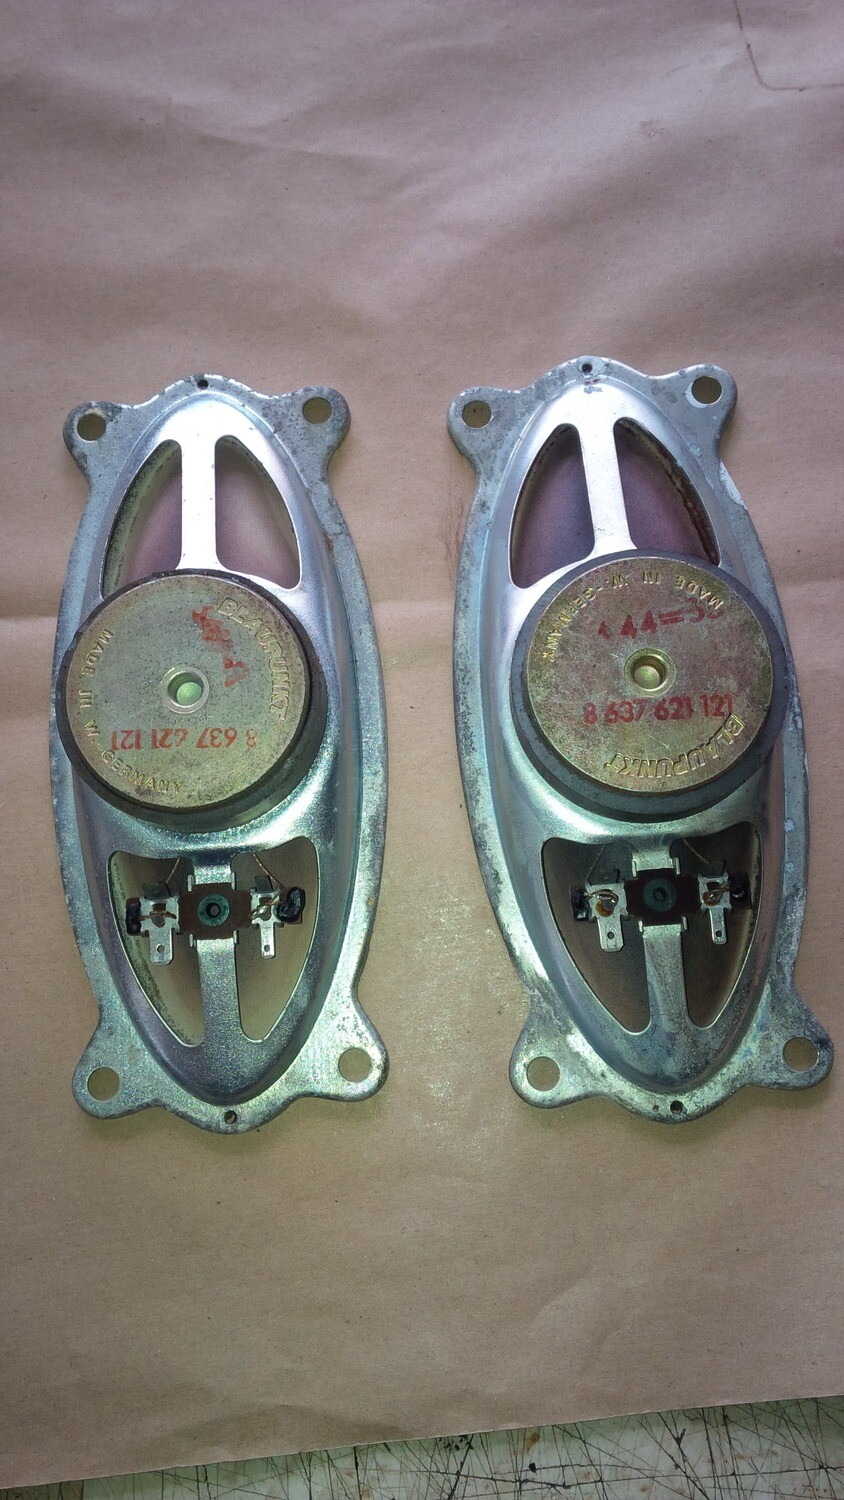 Speakers rear for Opel Monza, Vauxhall Royale Coupe (pair)